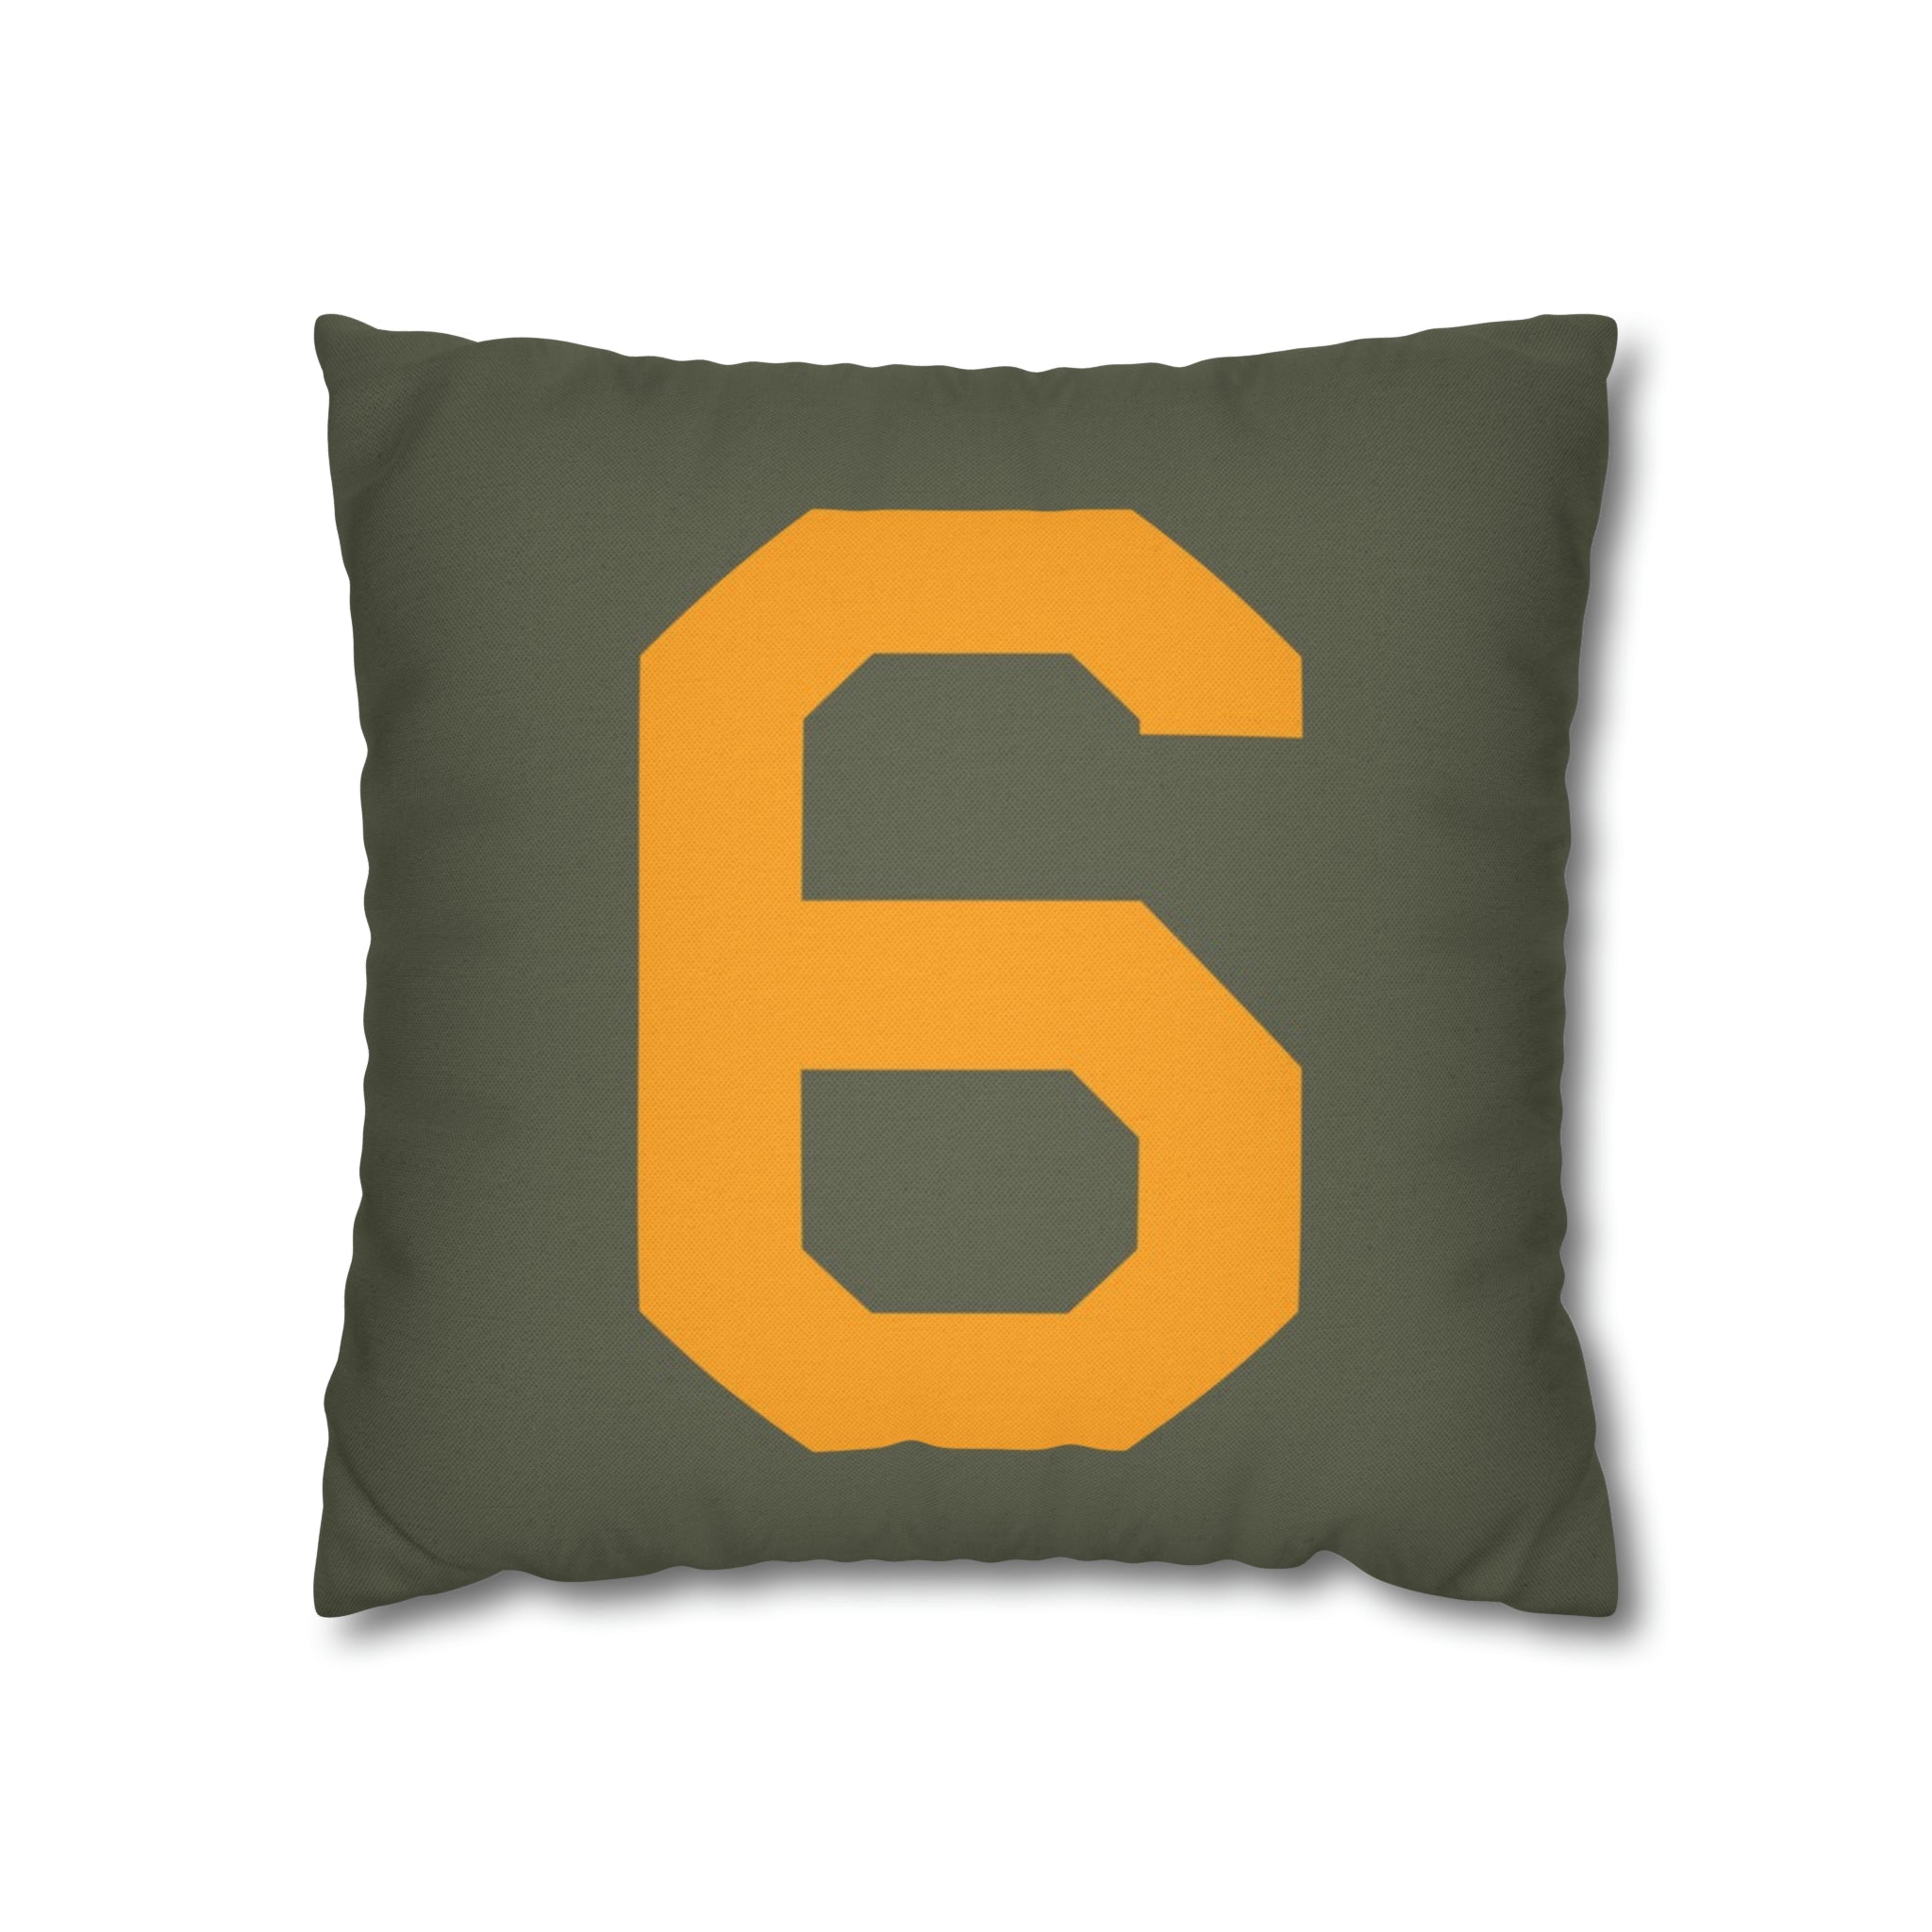 WWII USAAF Number "6" Square Pillowcase - I Love a Hangar